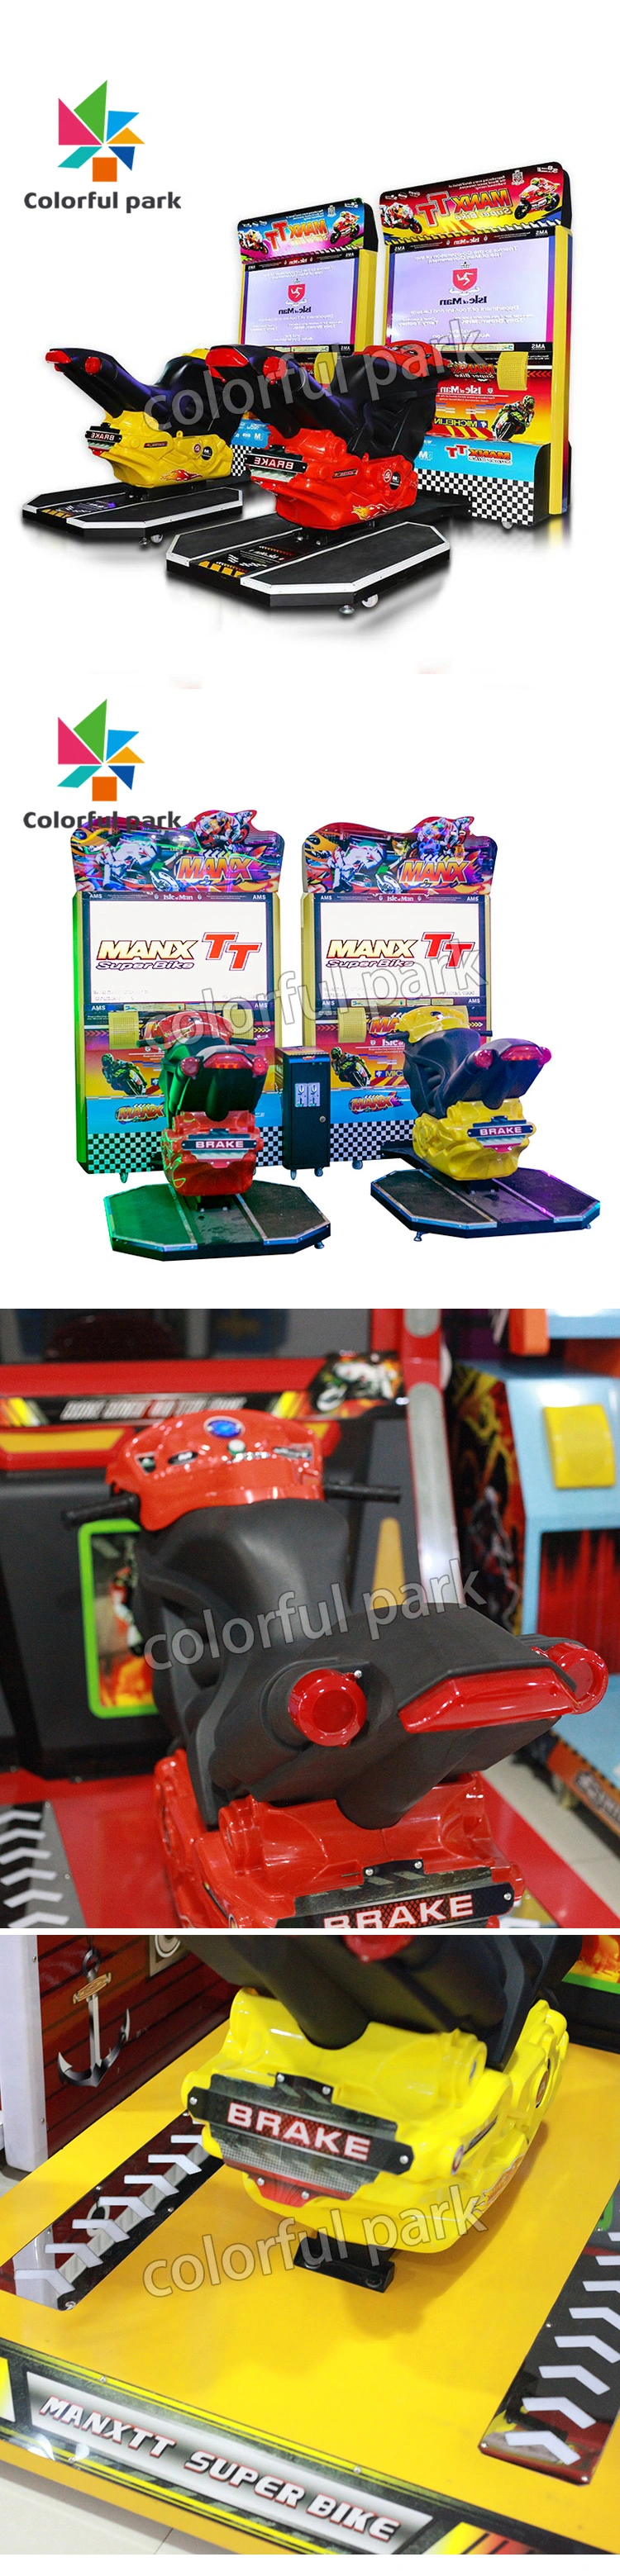 Colorful Park Coin Operated Racing Game Amusement Park Game Machine Tt Moto Arcade Game